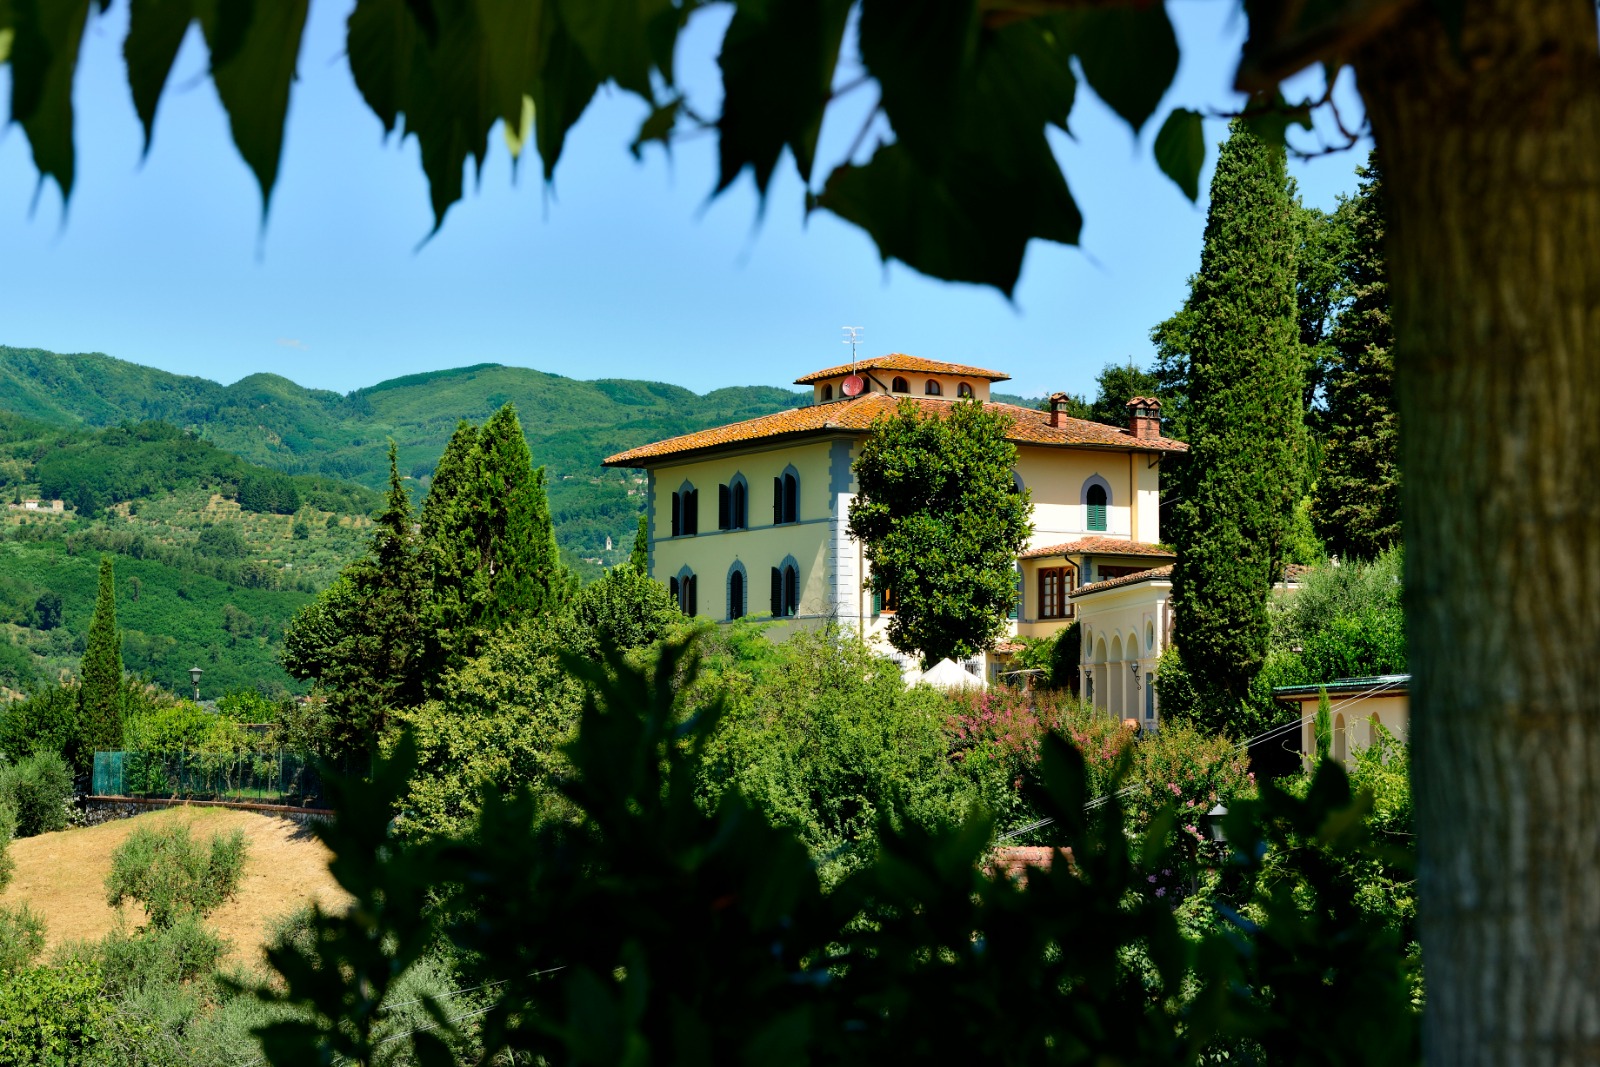 Villa Parri, 7 reasons to choose for an eco-sustainable holiday in Tuscany